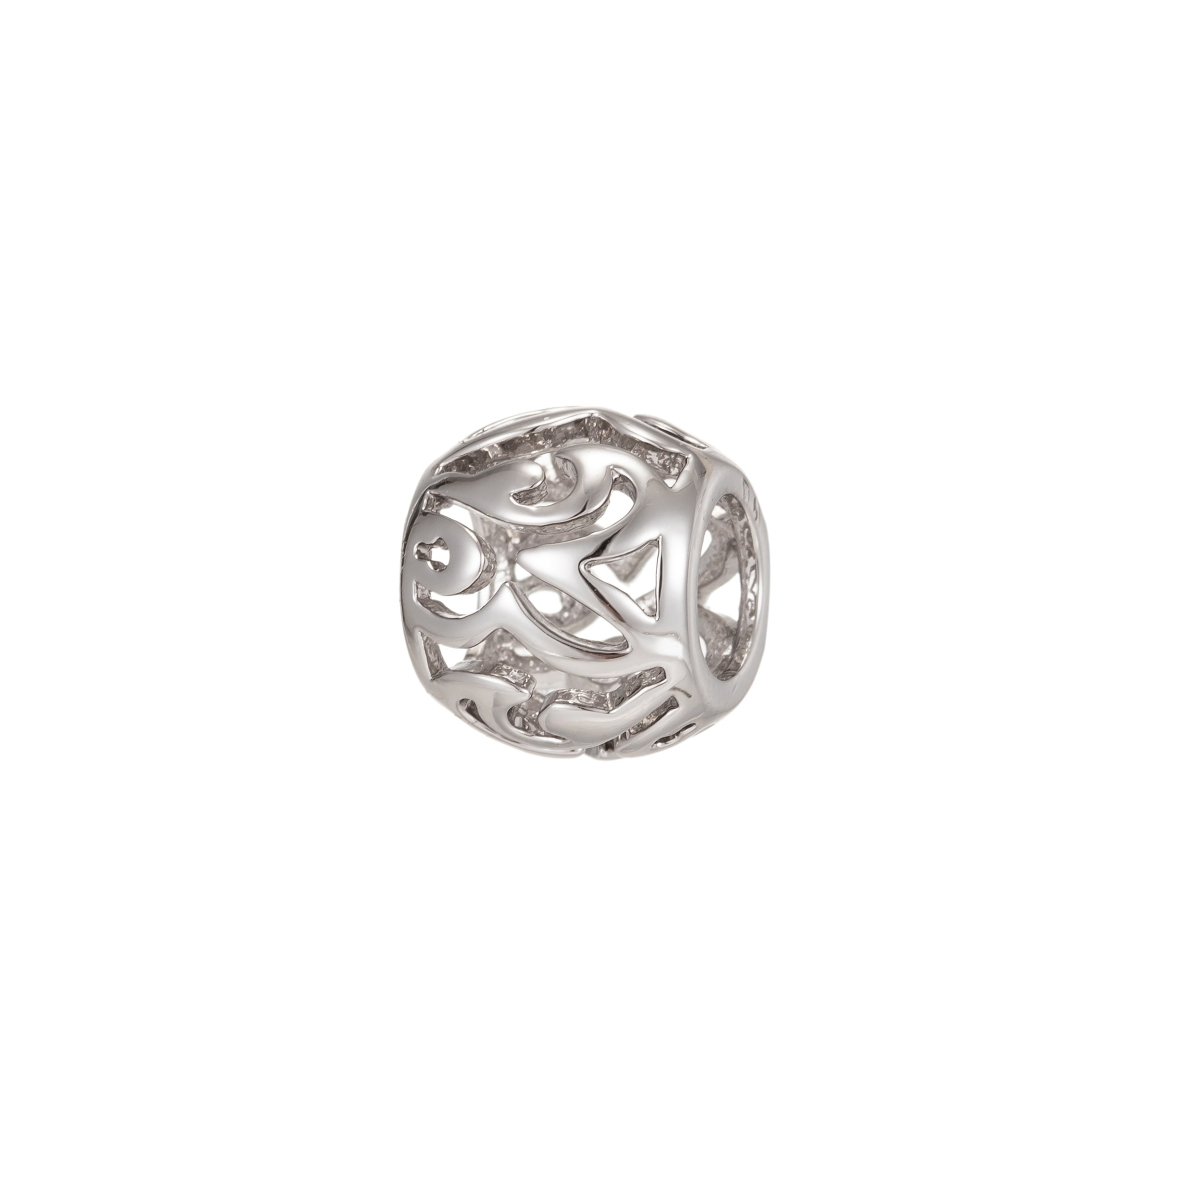 Dainty Pure Silver Ornamented Beads, Gold Filled Silver Art Jewelry Making Beads B-195 - DLUXCA